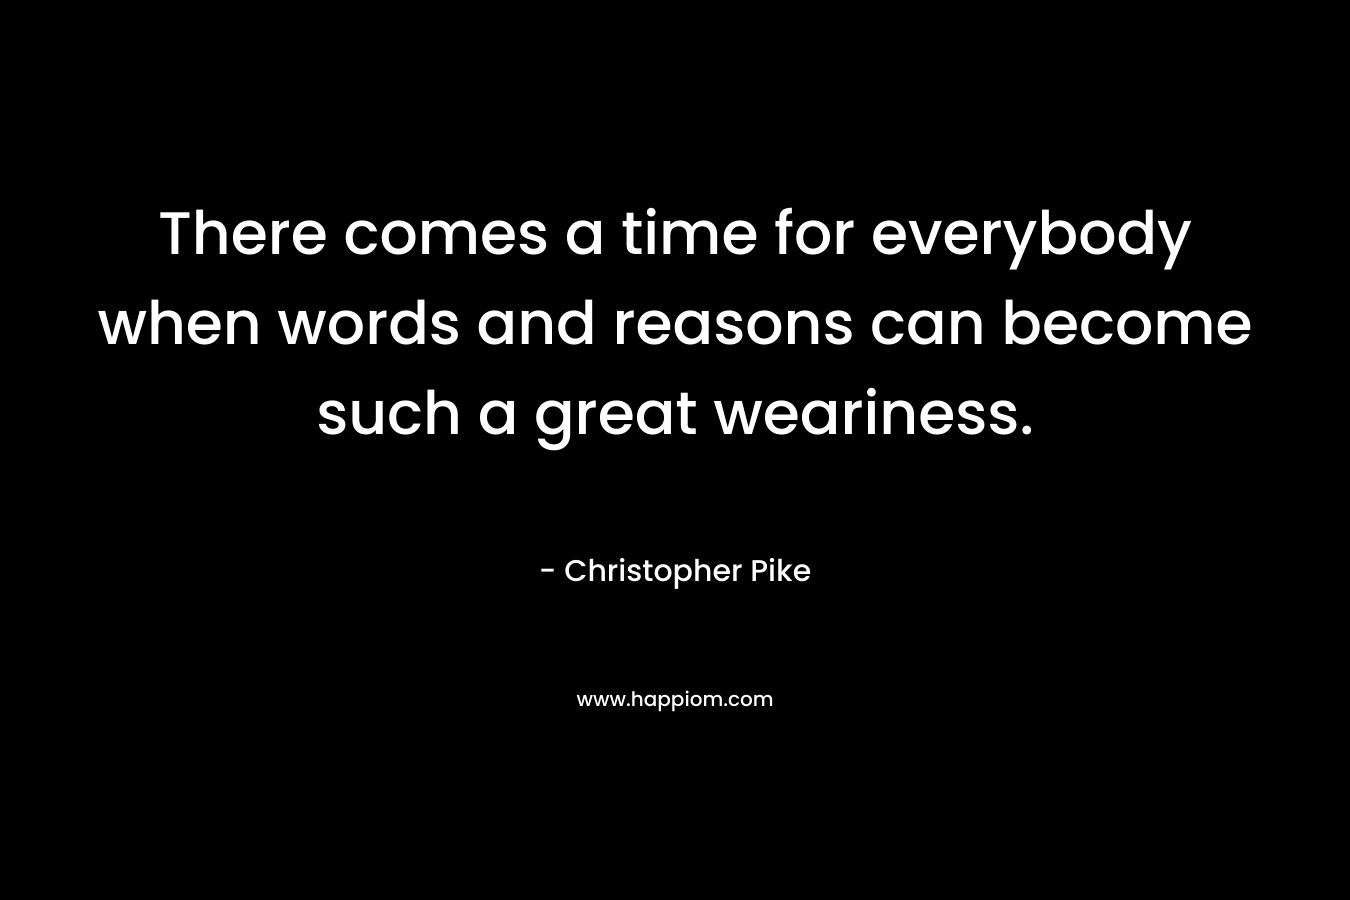 There comes a time for everybody when words and reasons can become such a great weariness.